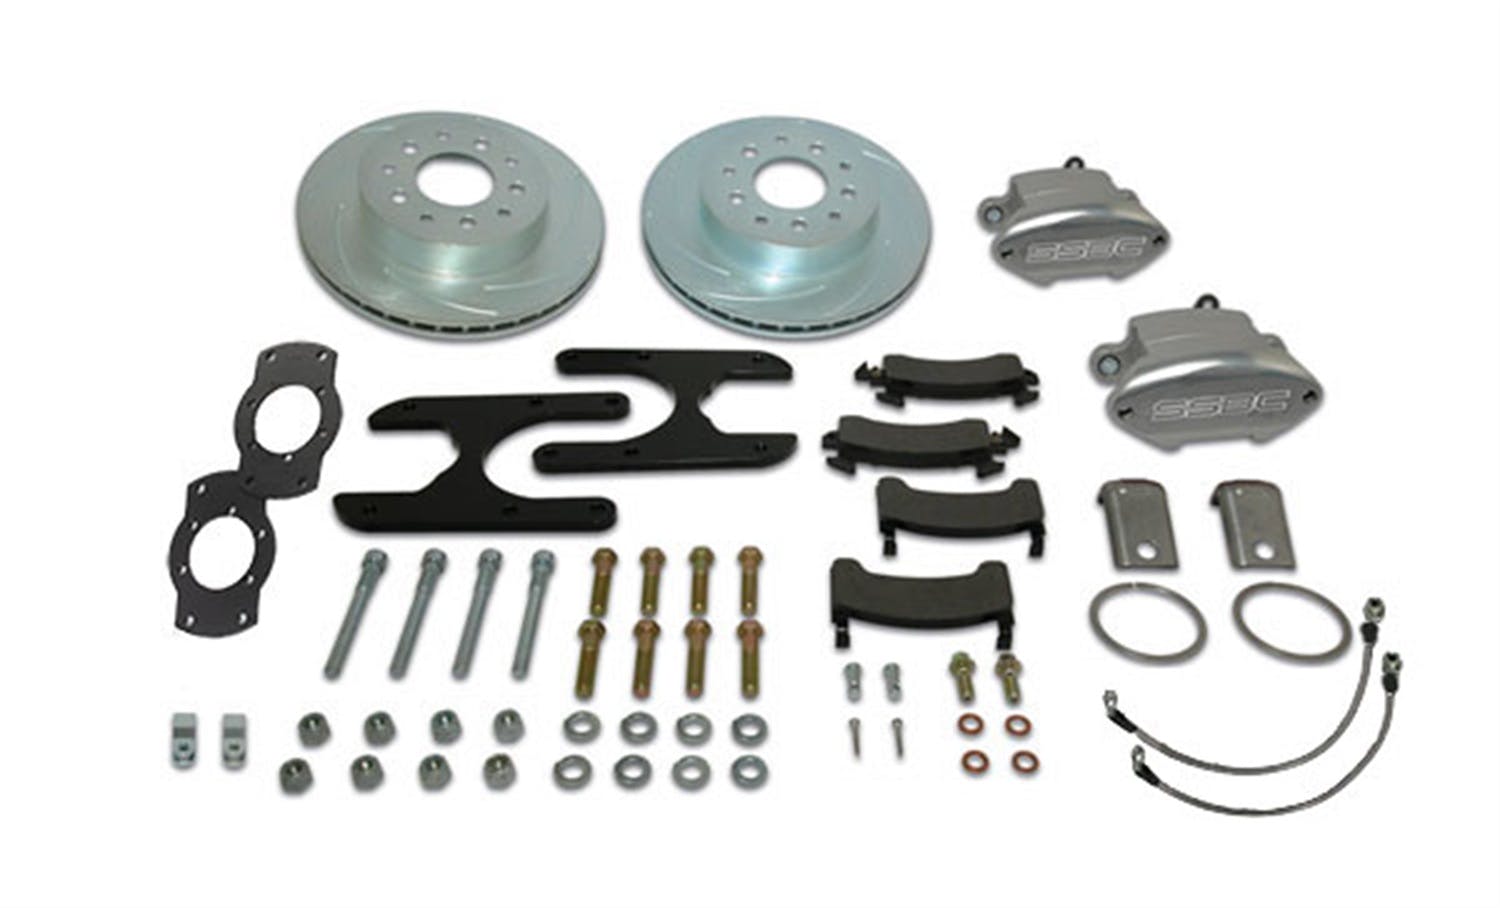 Stainless Steel Brakes A155-3BK Sport R1 A155-3 kit w/black calipers